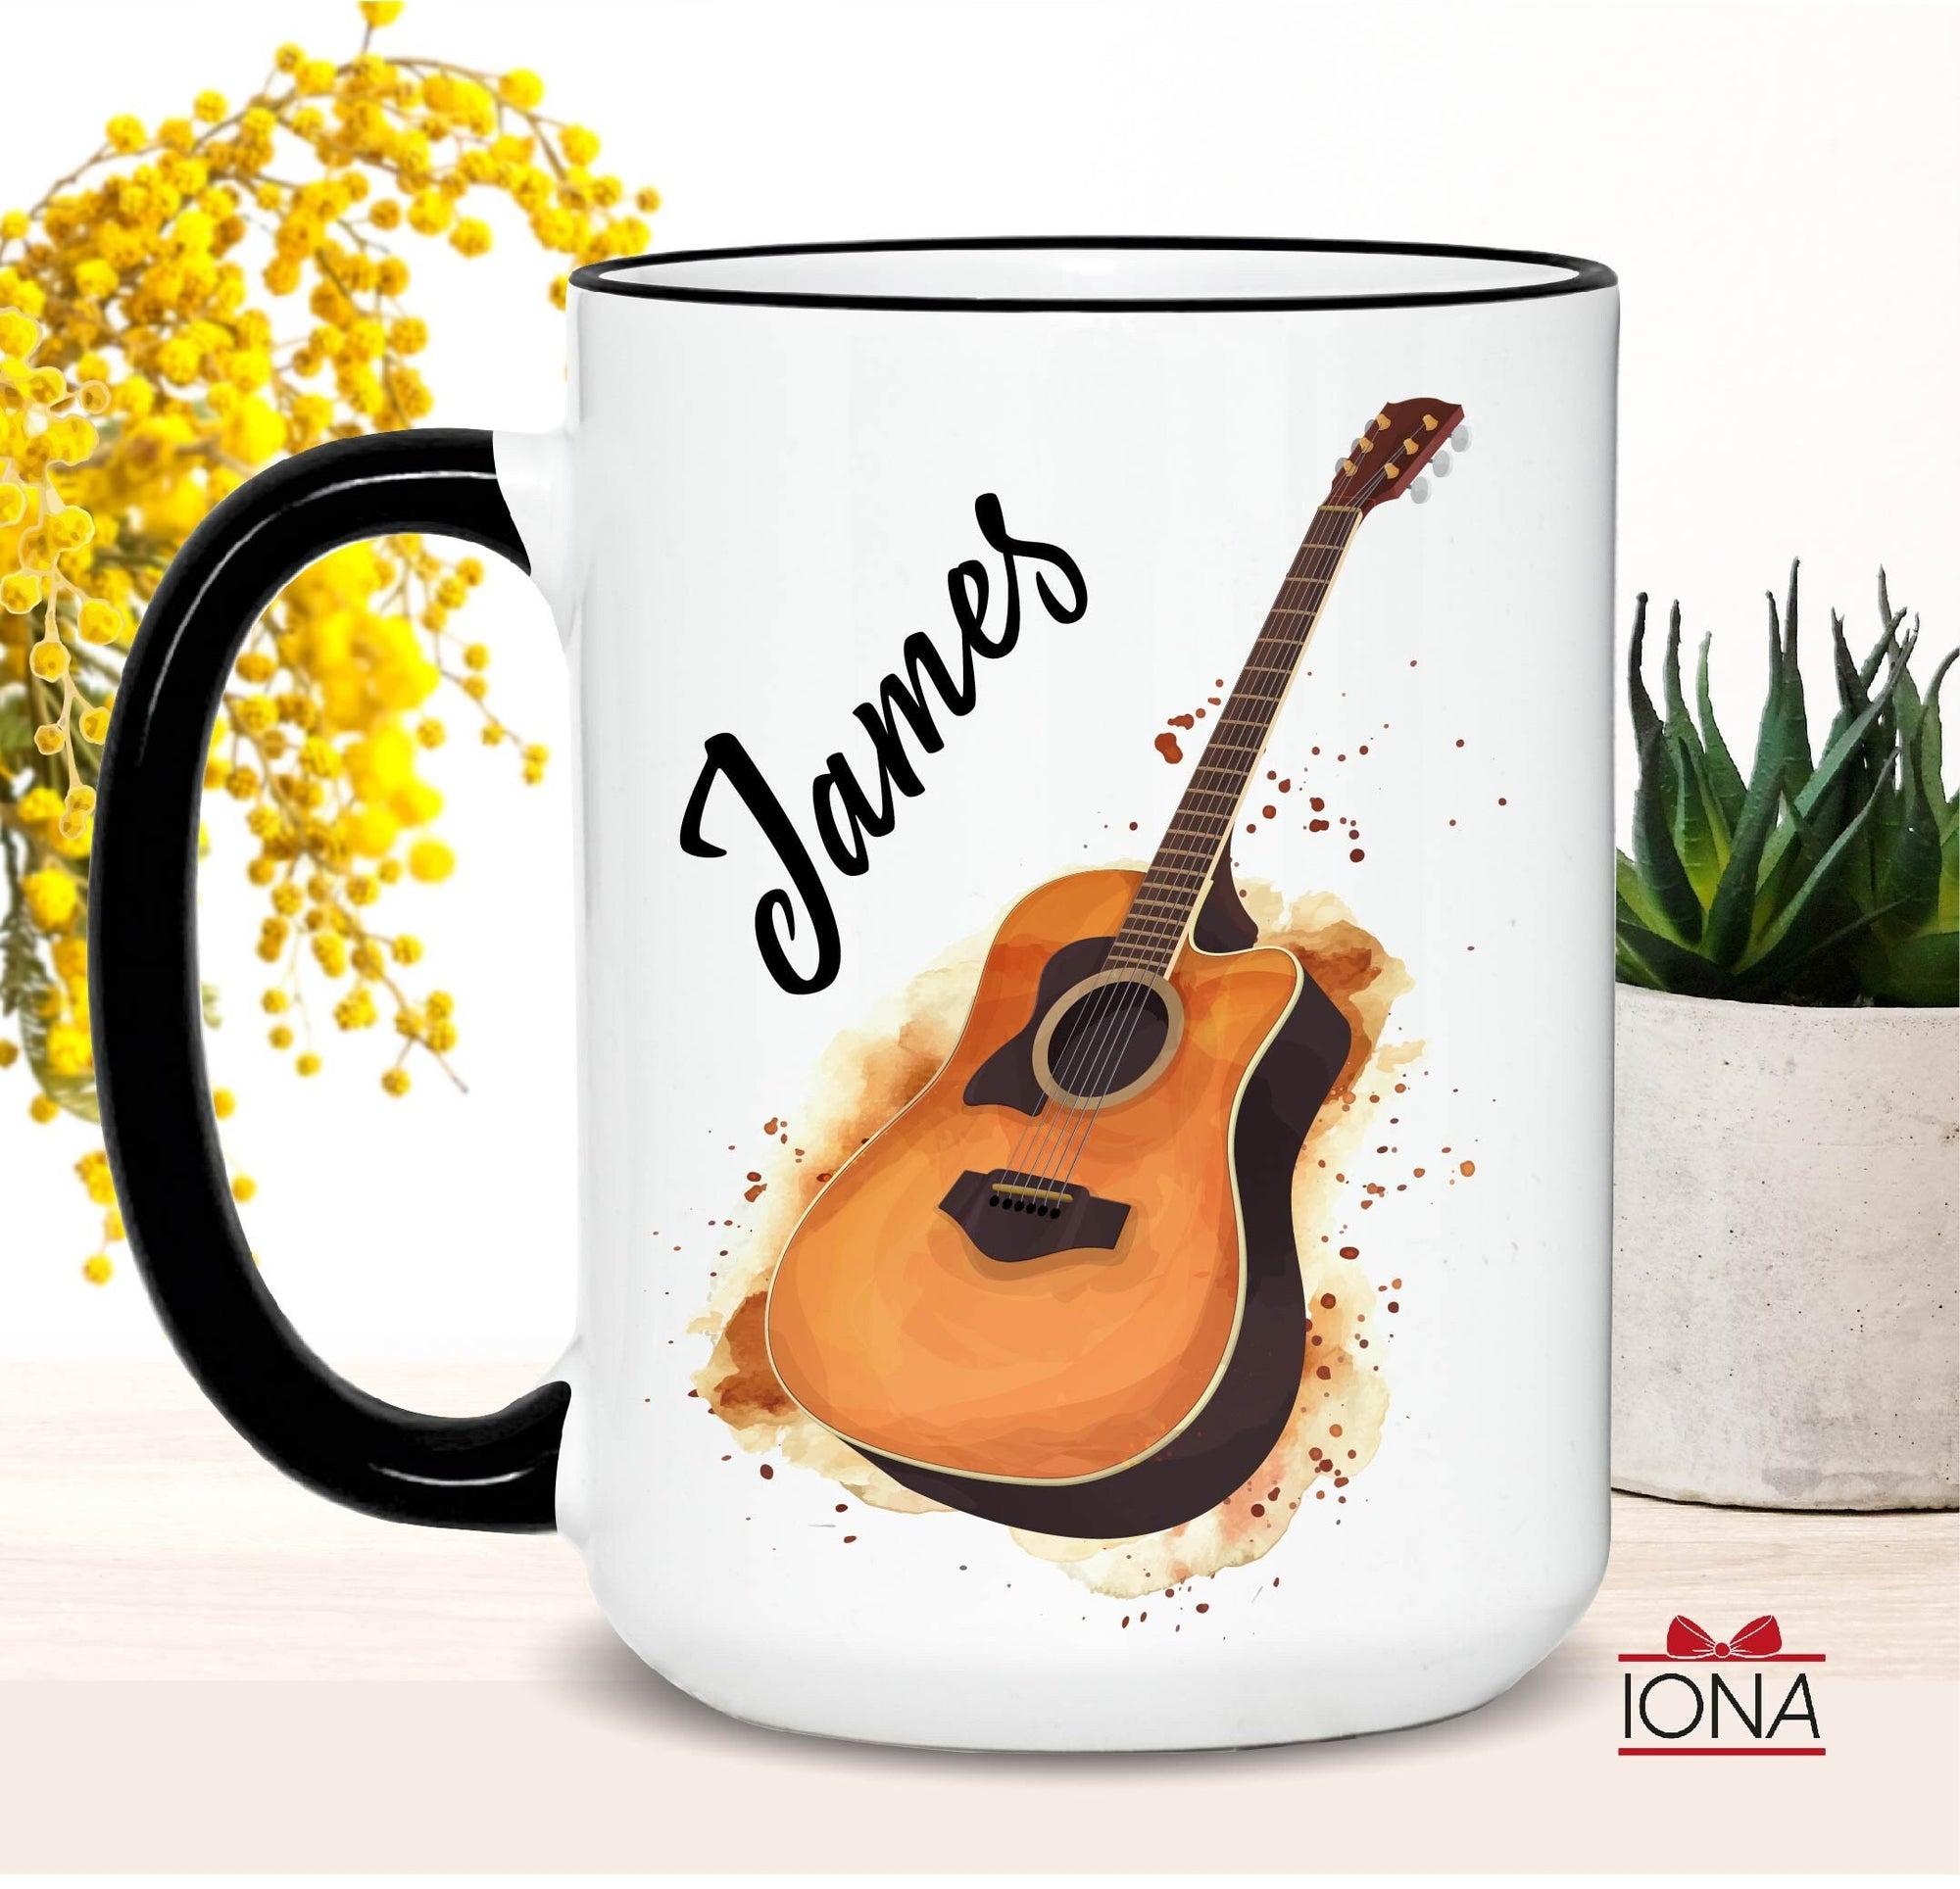 Guitar Coffee Mug, Custom Name Guitarist Gifts for Men, Gift for Women, Guitar Lovers Cup, Guitarist Music Birthday Gifts, Personalized Gift